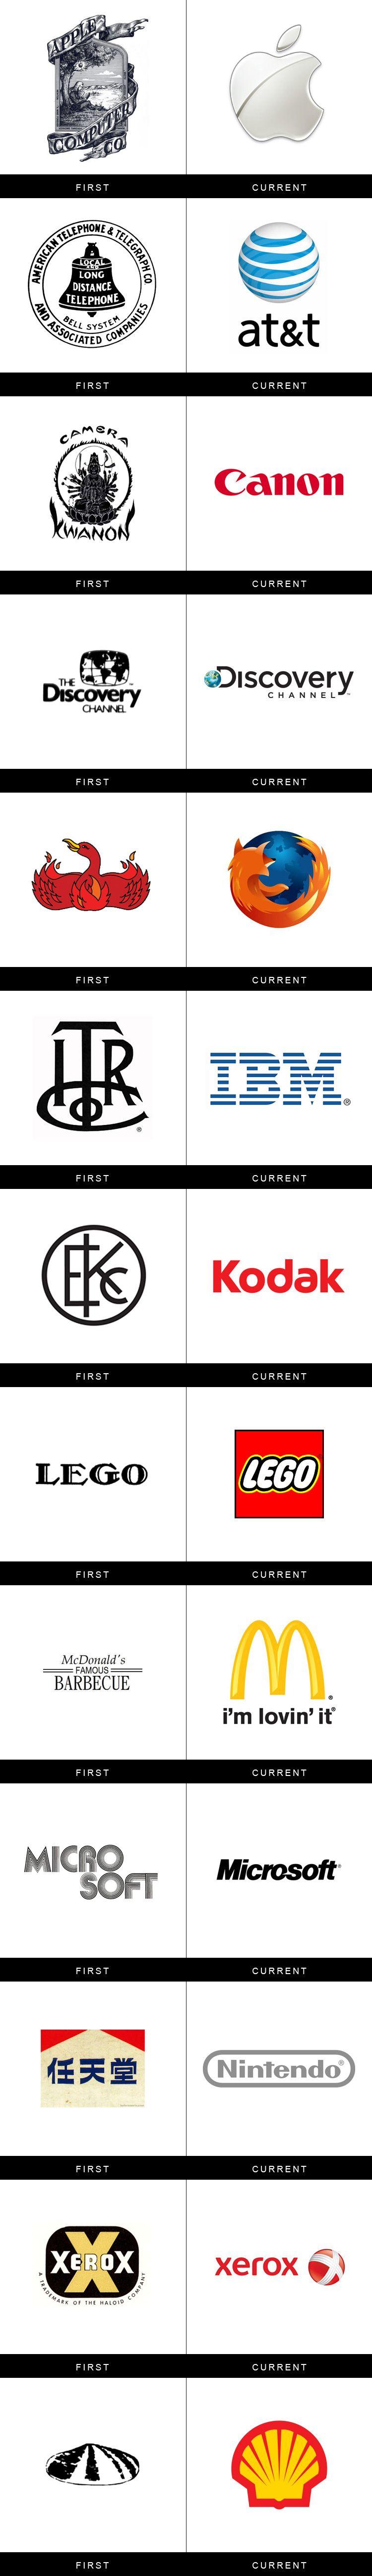 Current Company Logo - How company logos looked in the past vs today. Today I Learned